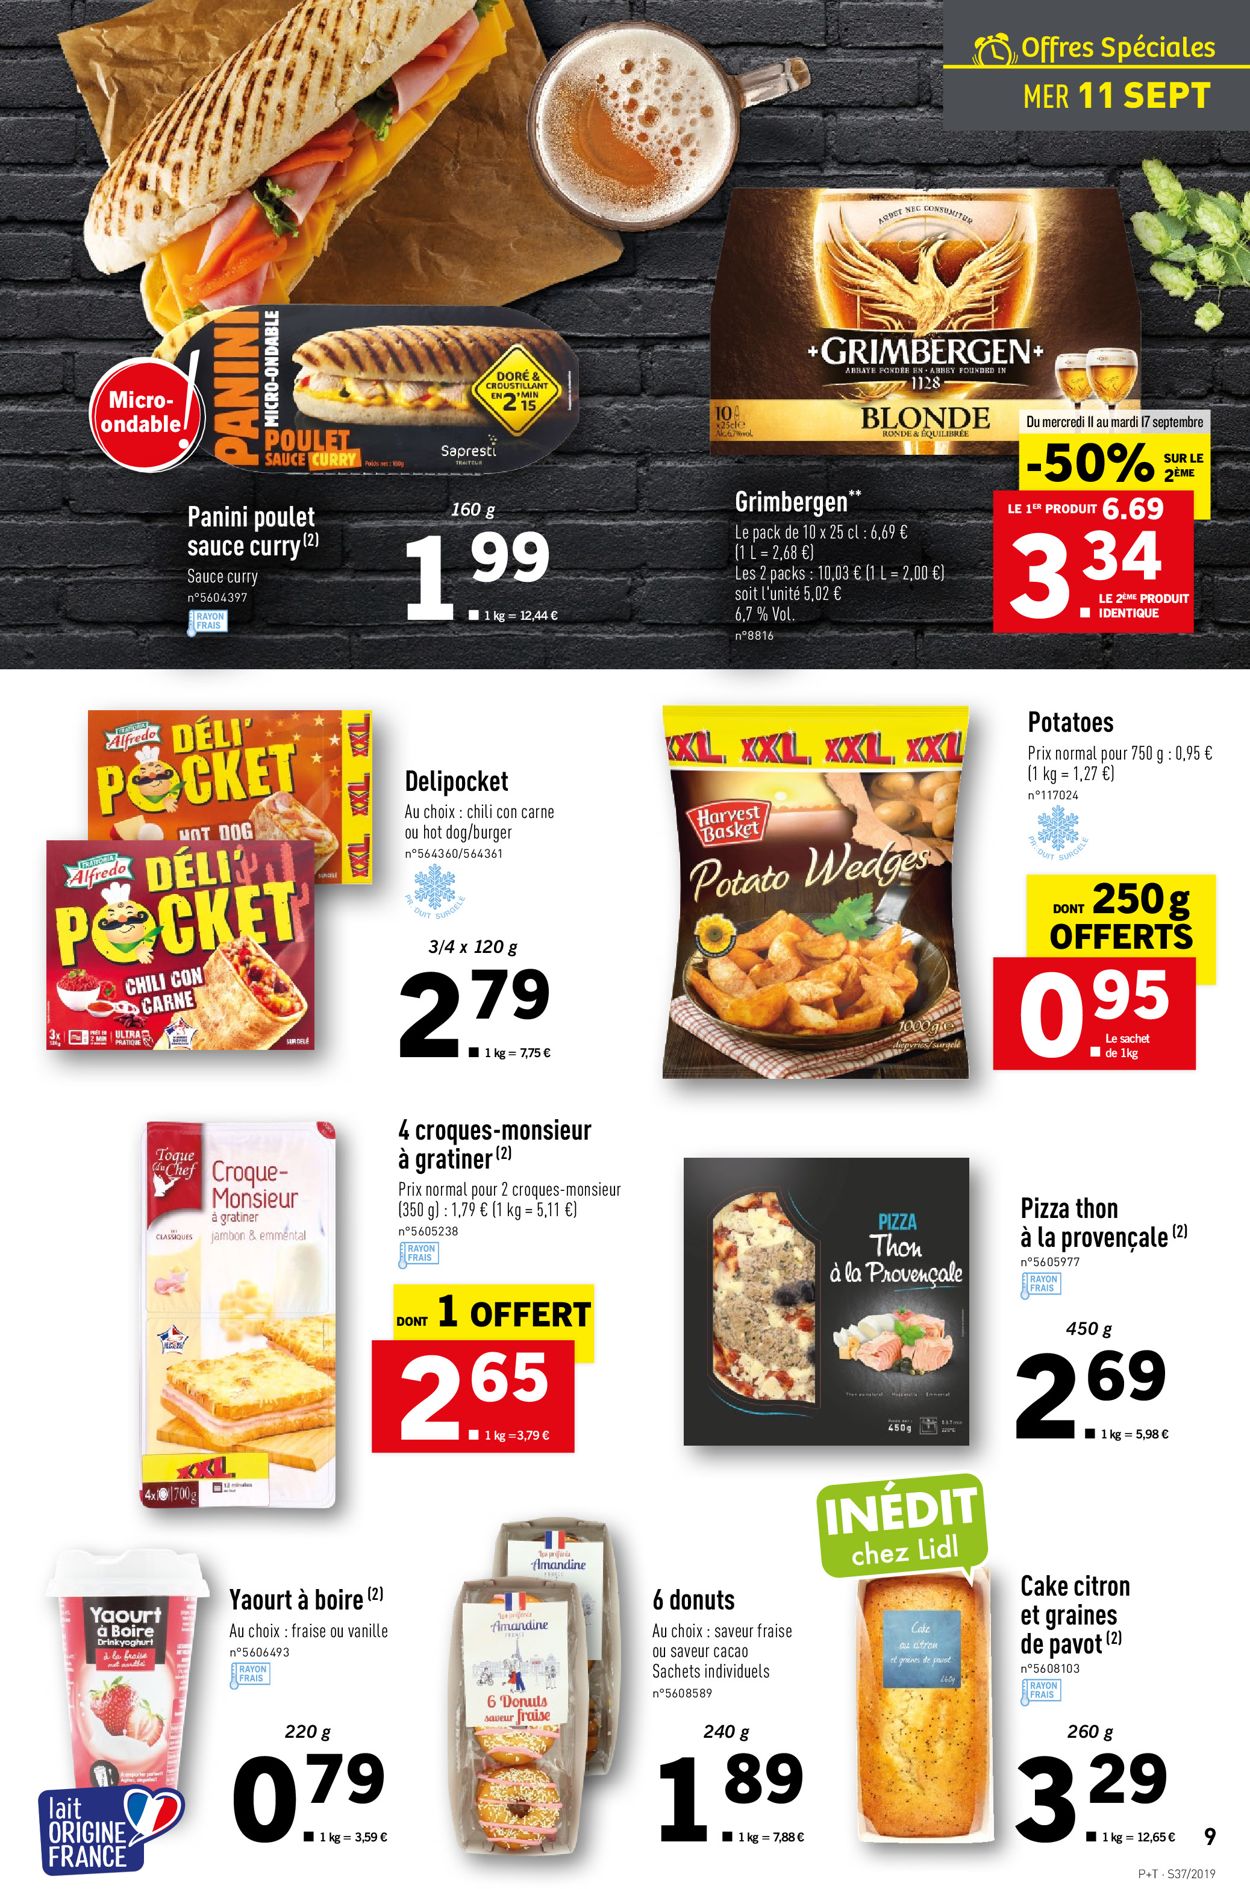 Lidl Catalogue - 11.09-17.09.2019 (Page 9)